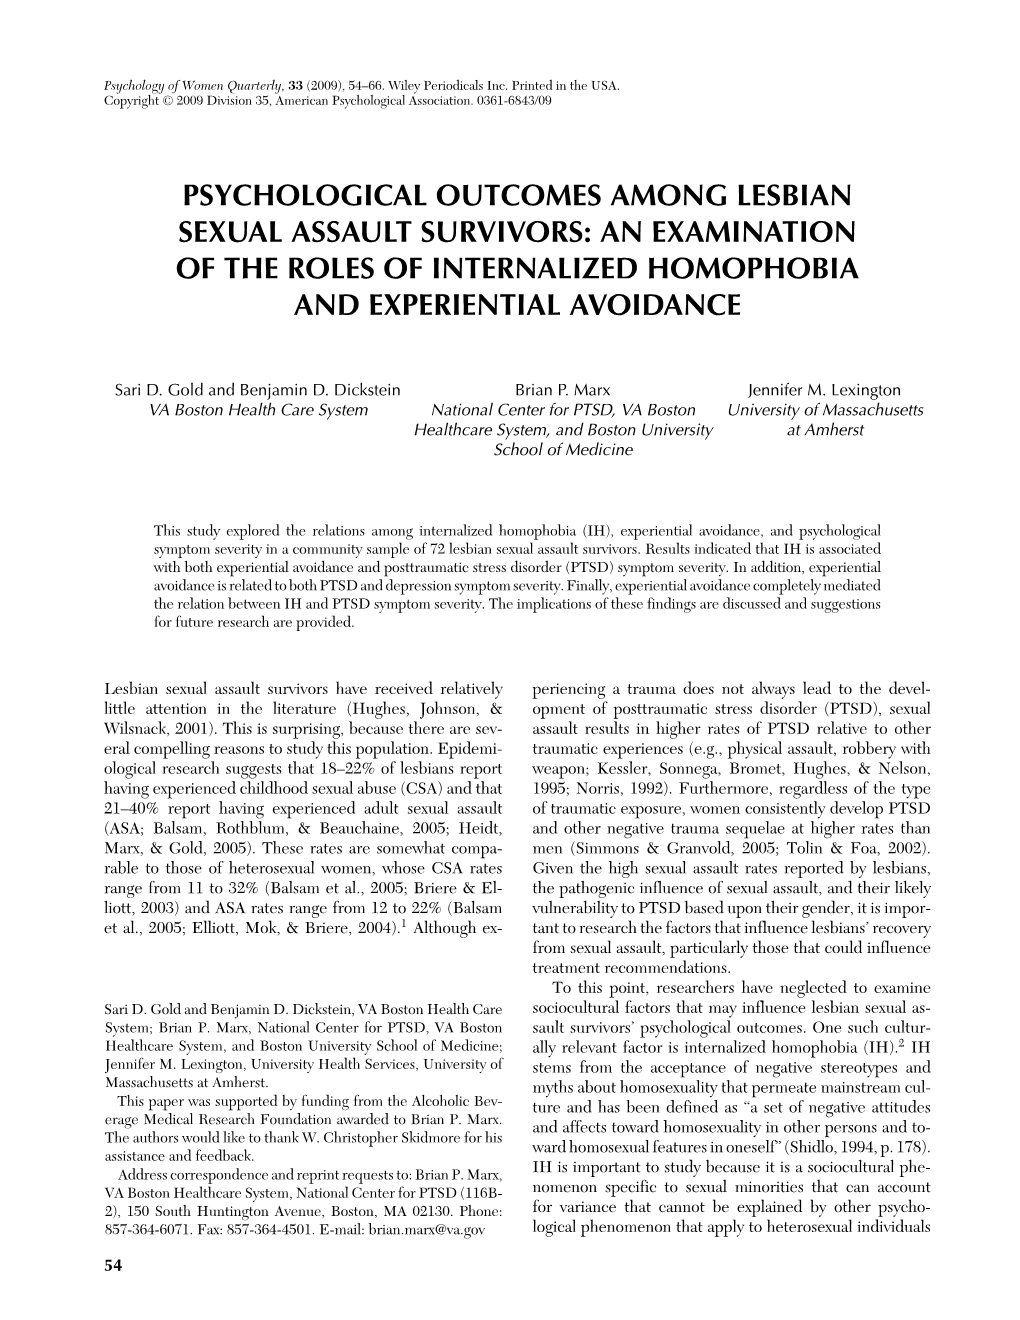 Psychological Outcomes Among Lesbian Sexual Assault Survivors: an Examination of the Roles of Internalized Homophobia and Experiential Avoidance